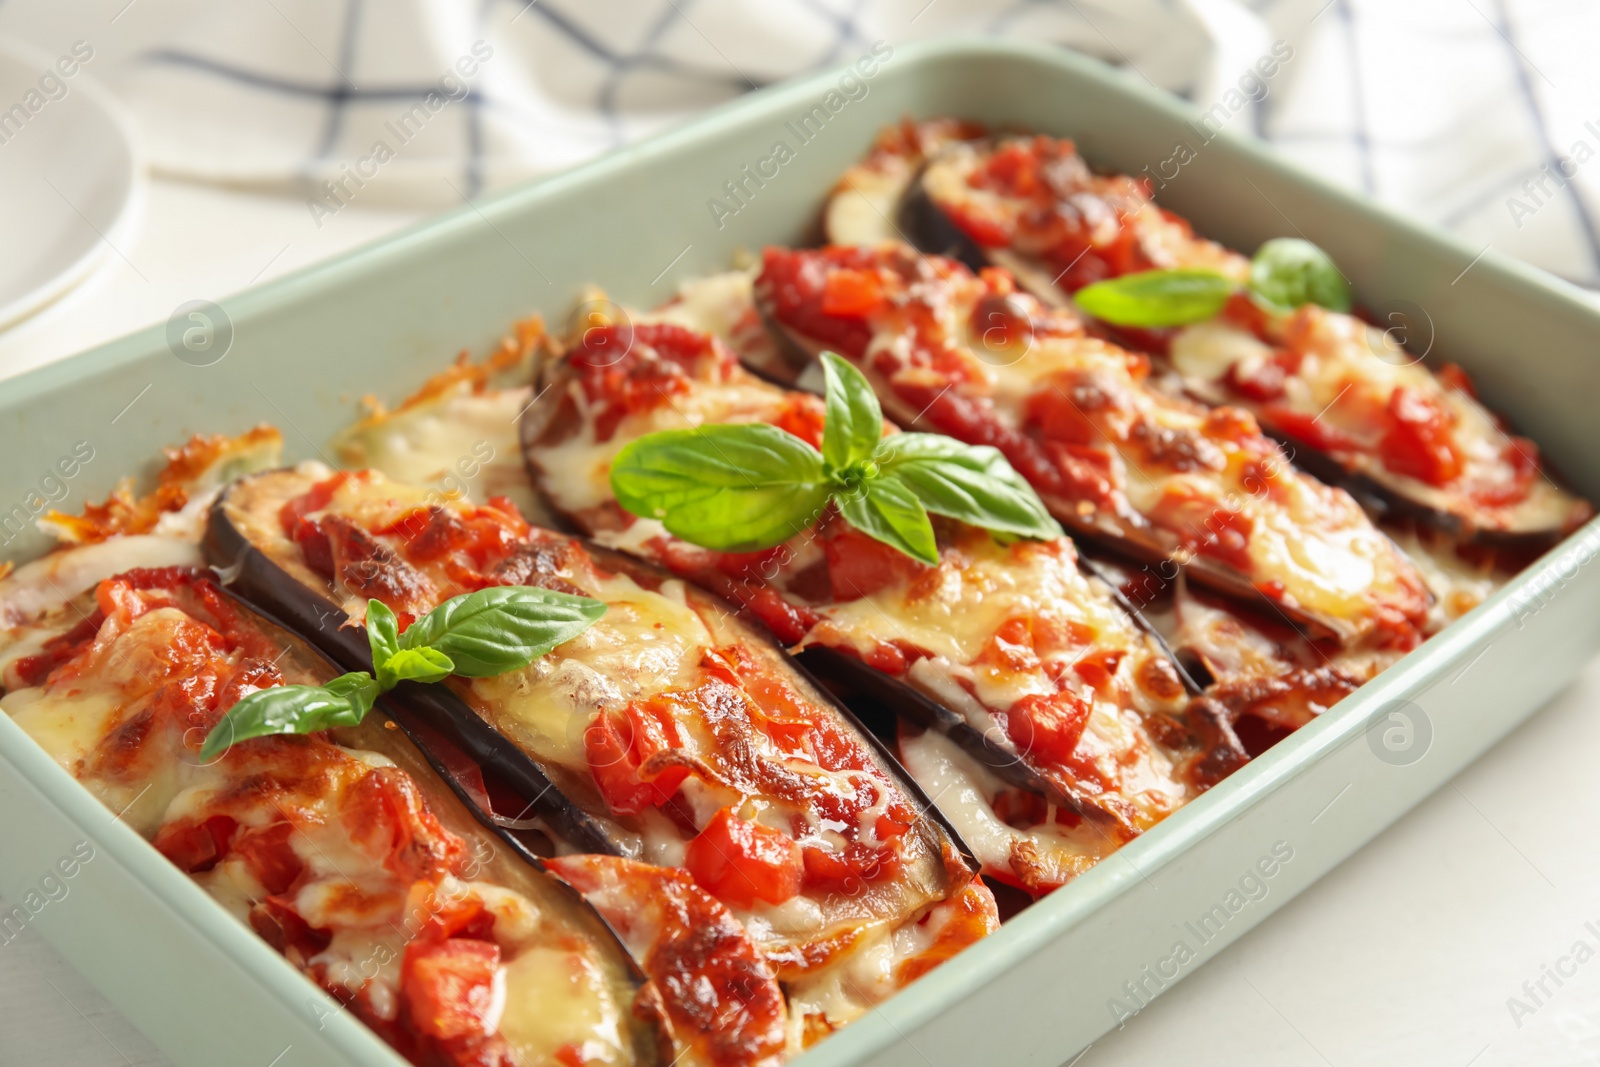 Photo of Baked eggplant with tomatoes, cheese and basil in dishware on white table, closeup